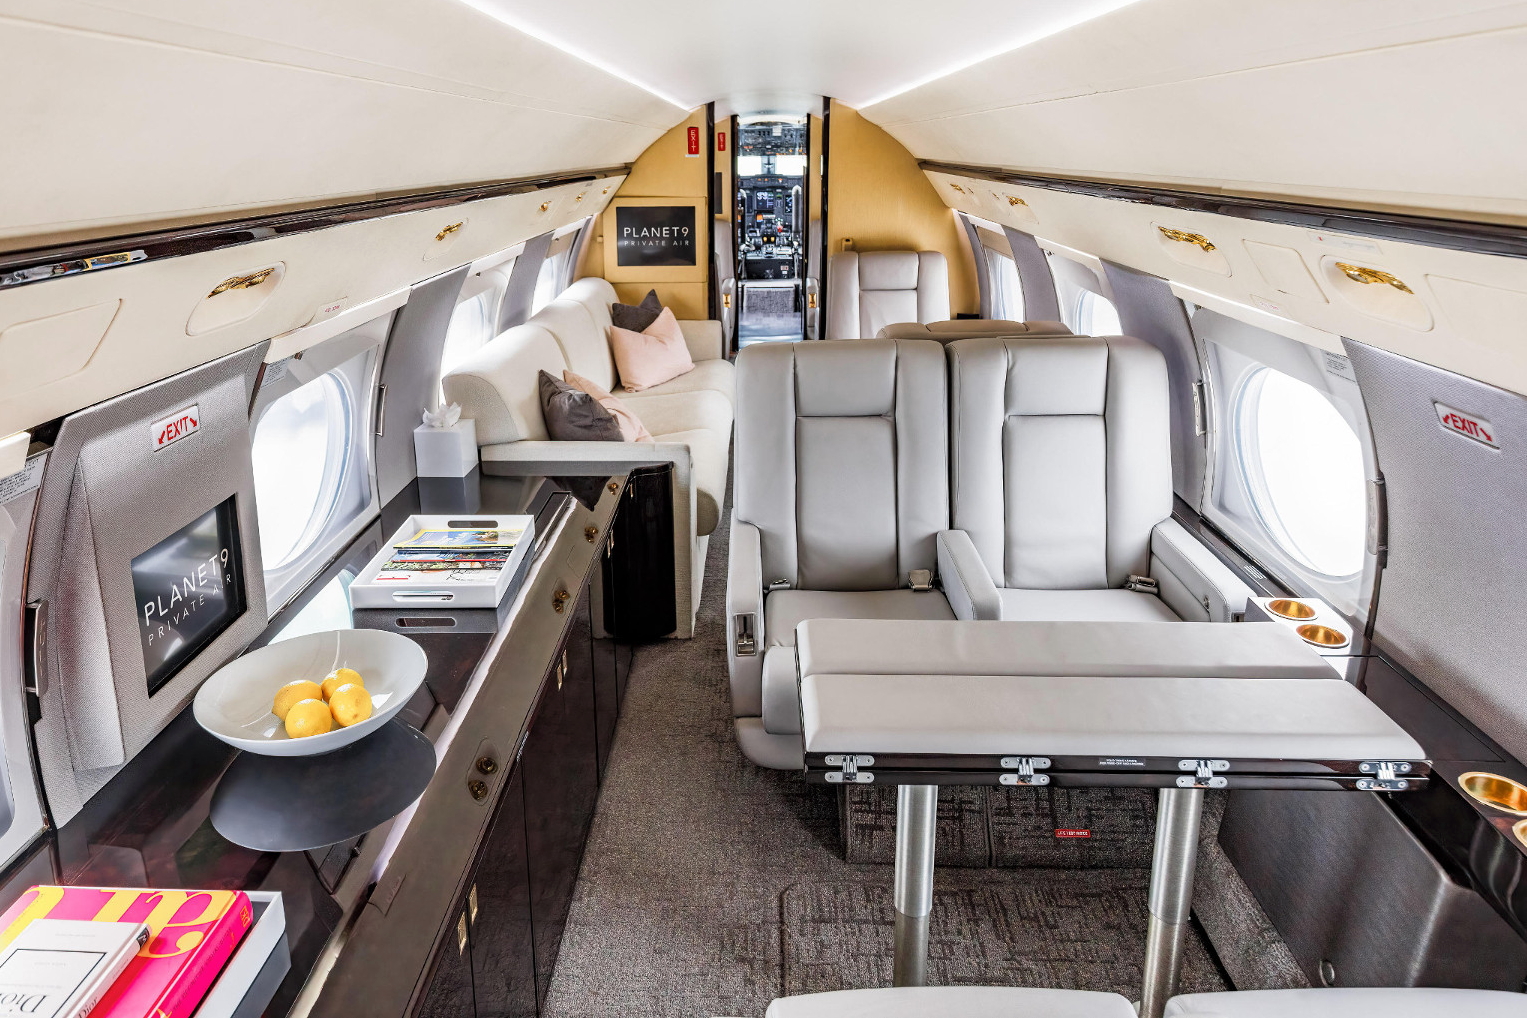 Interior of Planet 9's Gulfstream IV reg: N305PB. Click to enlarge.